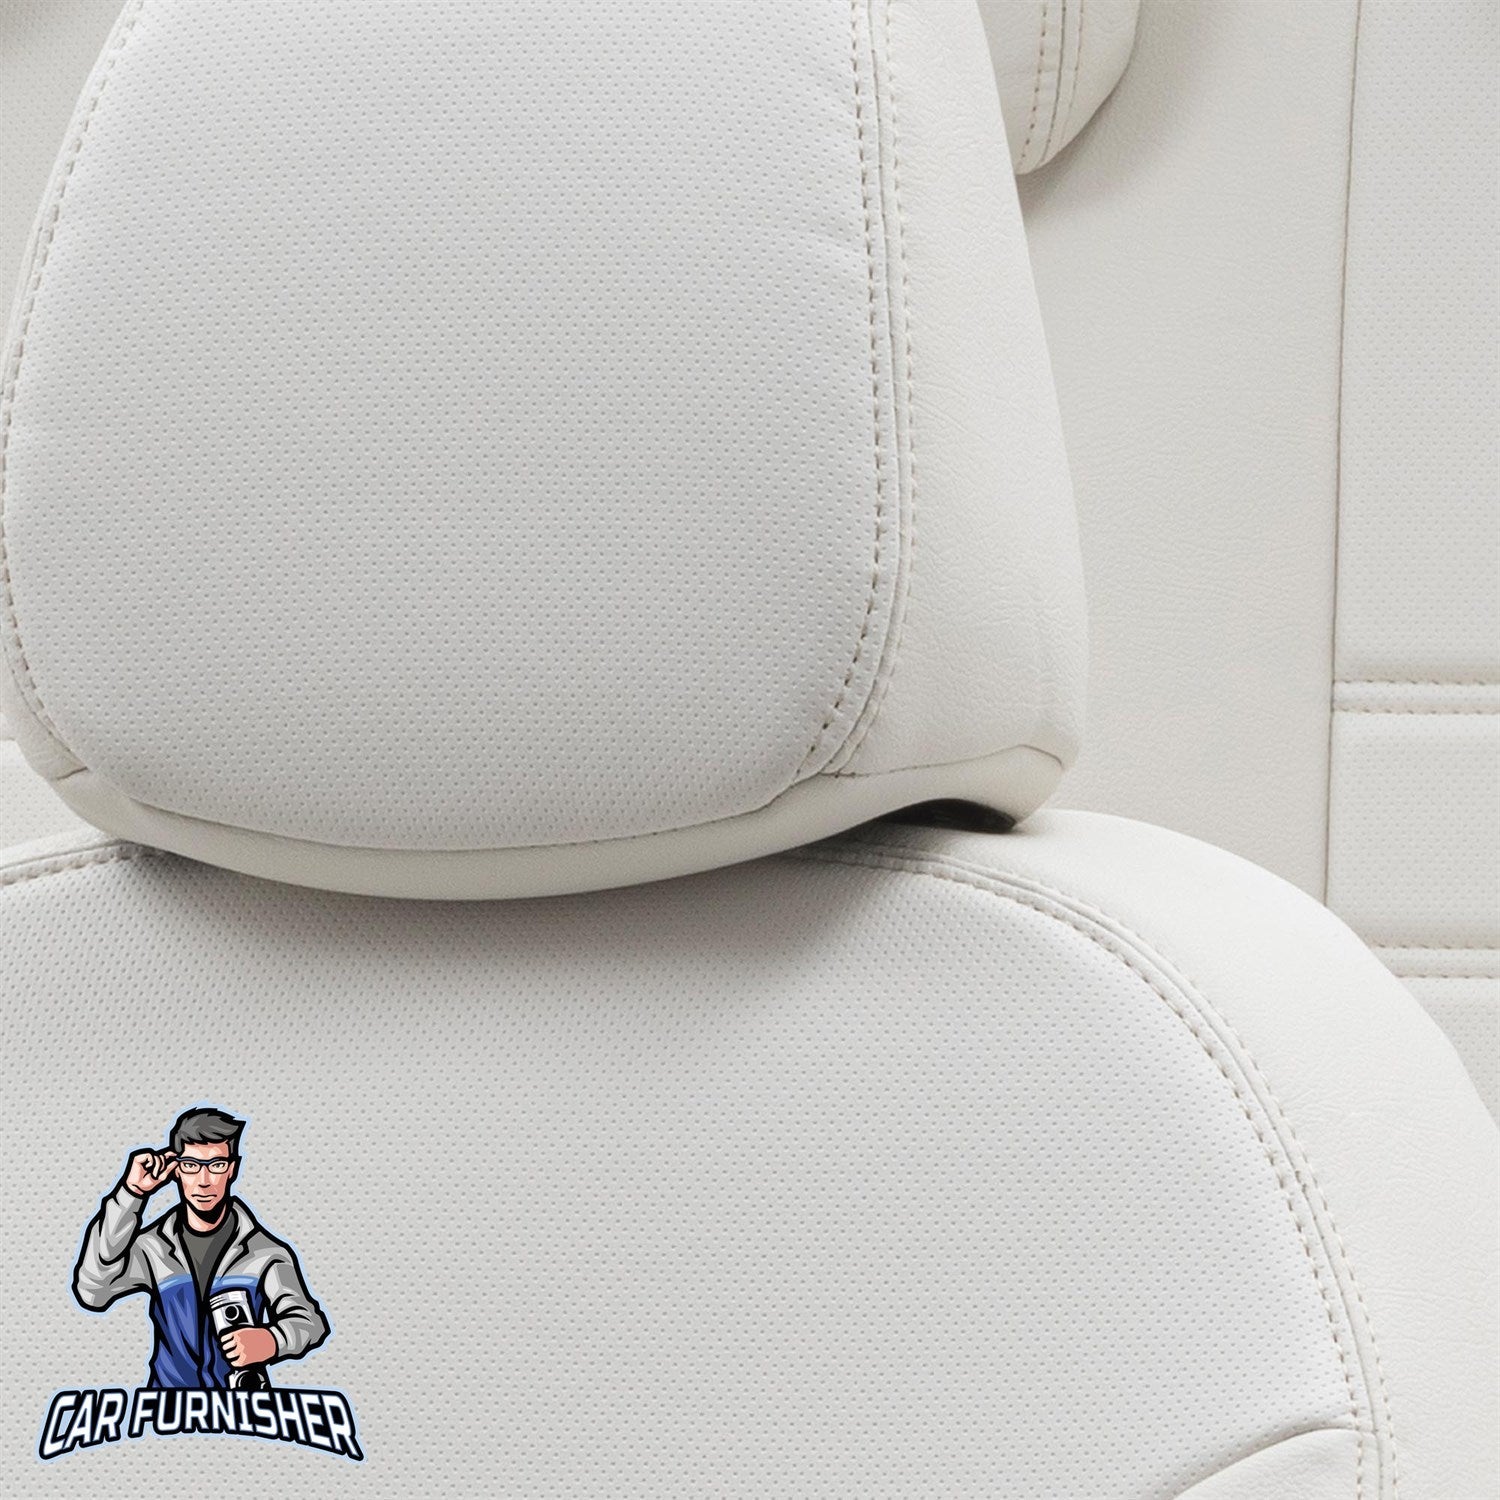 Mercedes Atego Seat Covers Istanbul Leather Design Ivory Leather